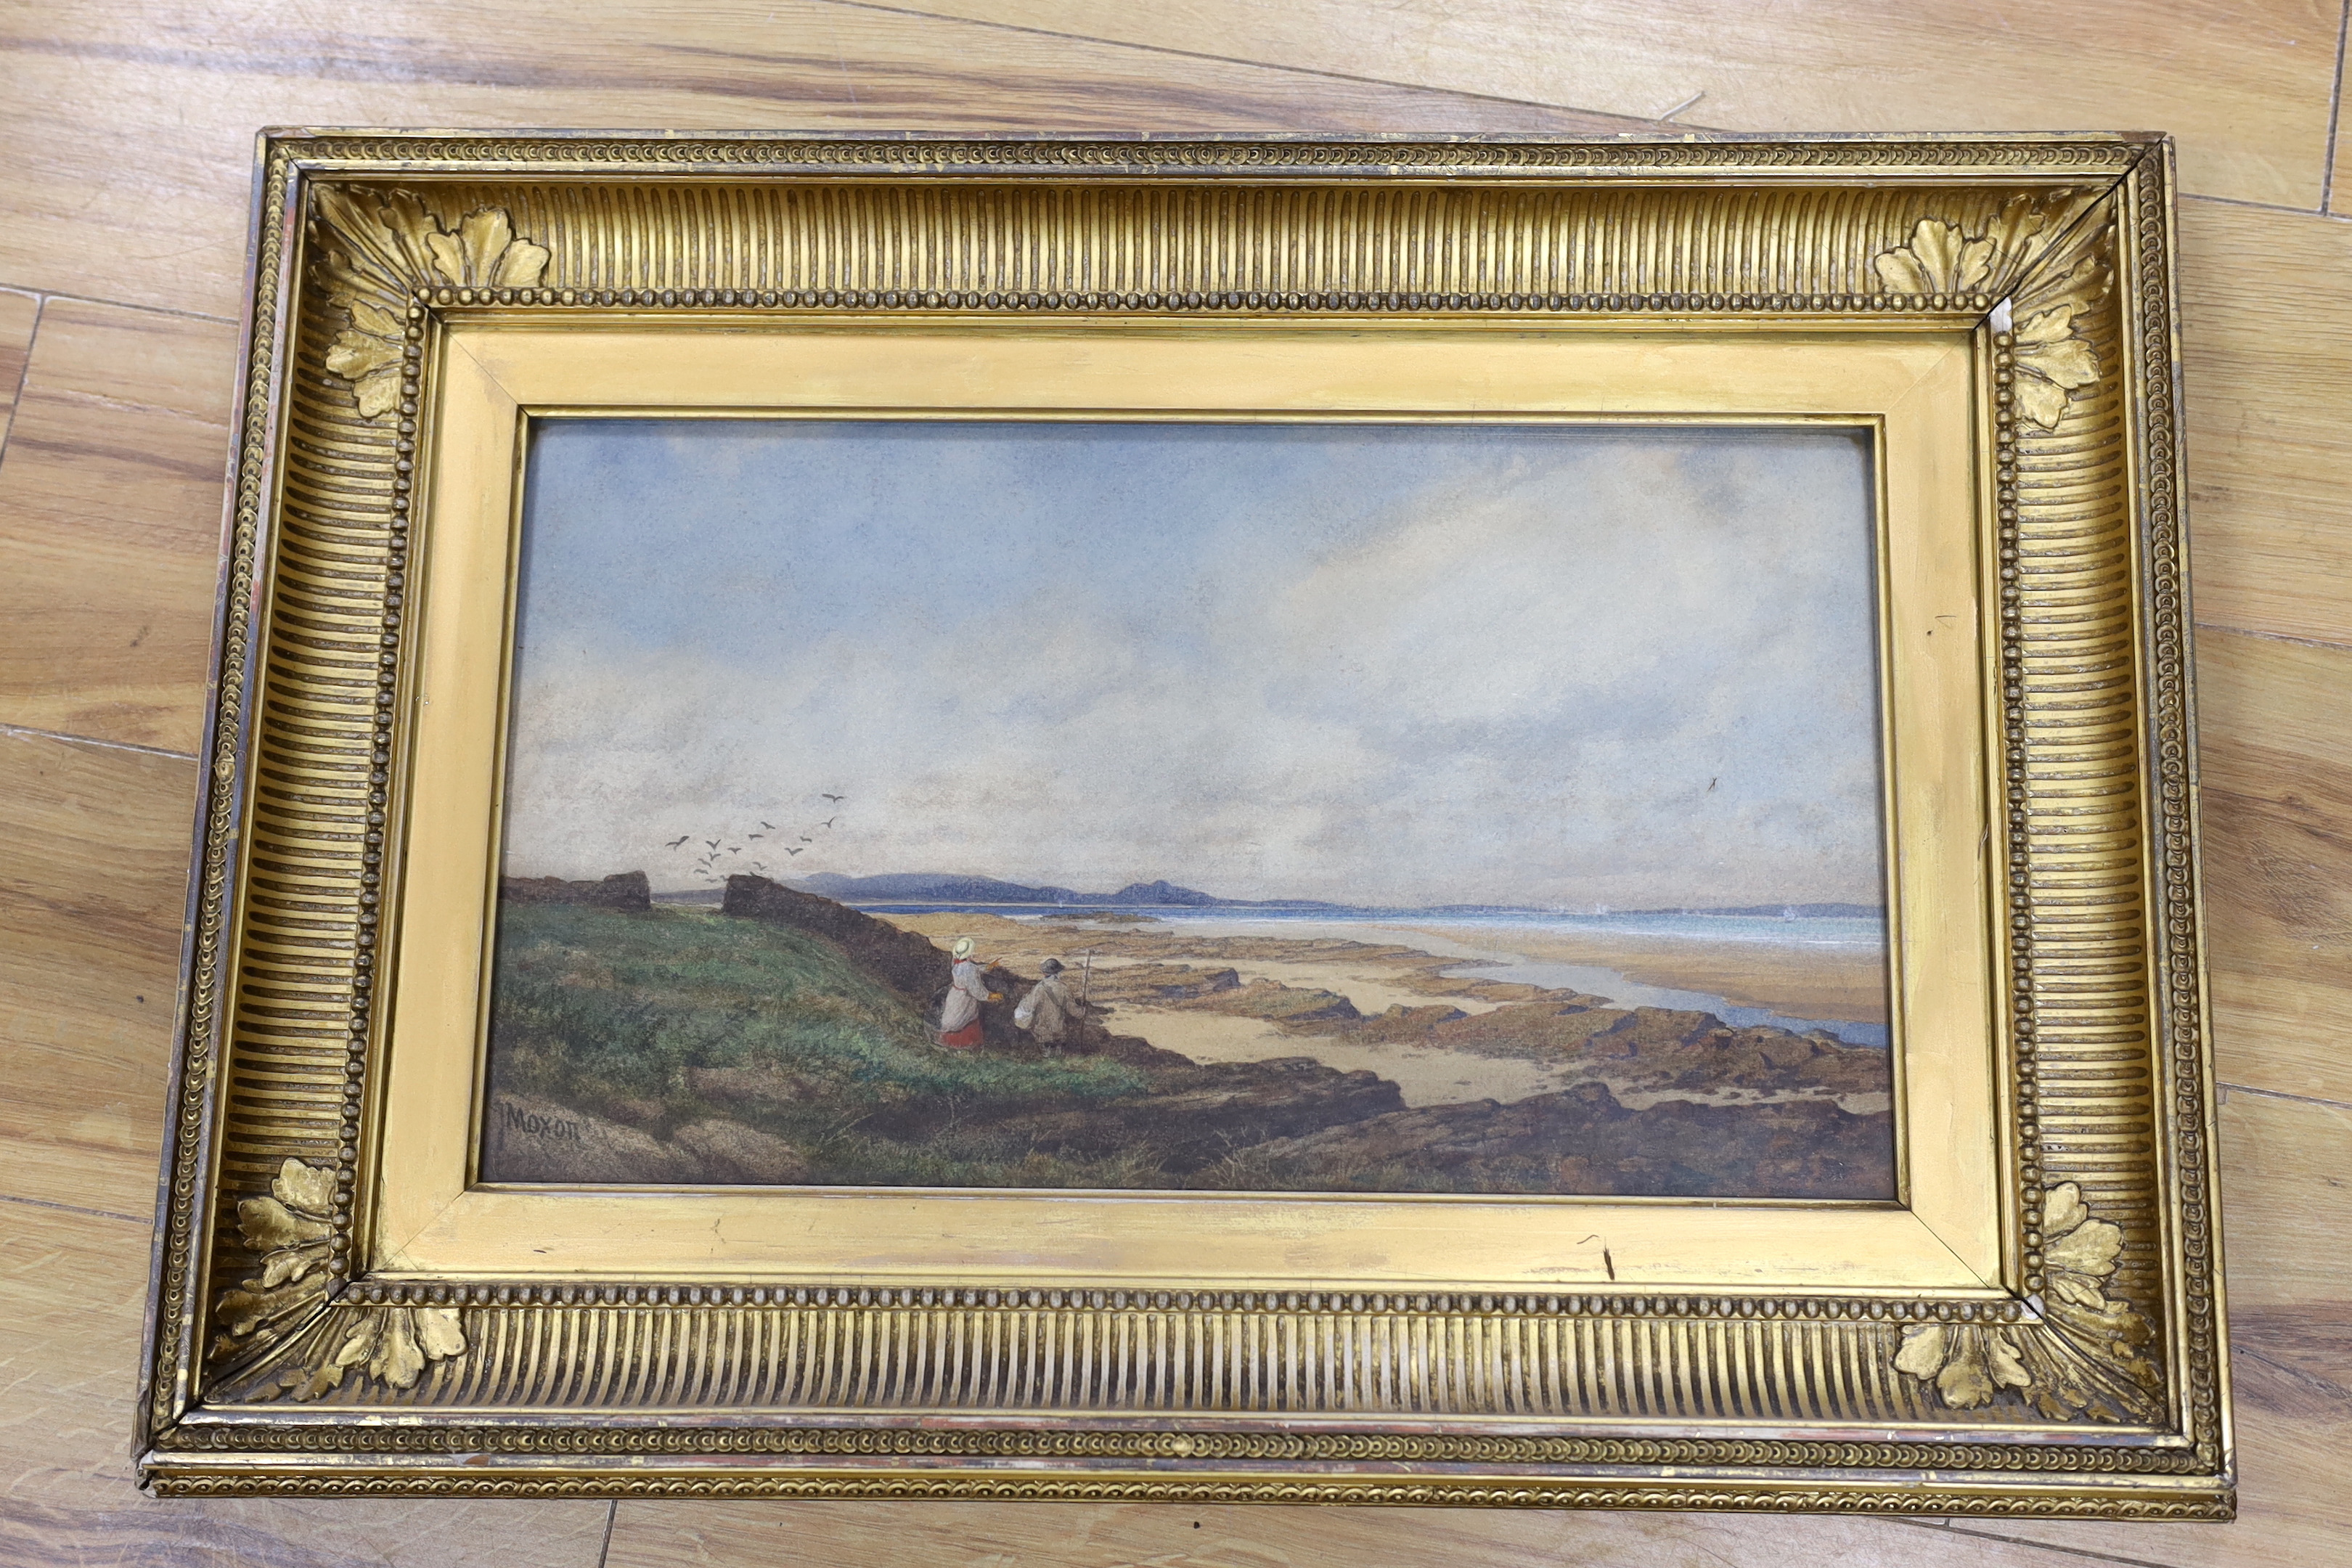 Herbert Moxon Cook (1844-1928), watercolour, Figures on a beach, signed, 26 x 46cm, housed in an ornate gilt frame